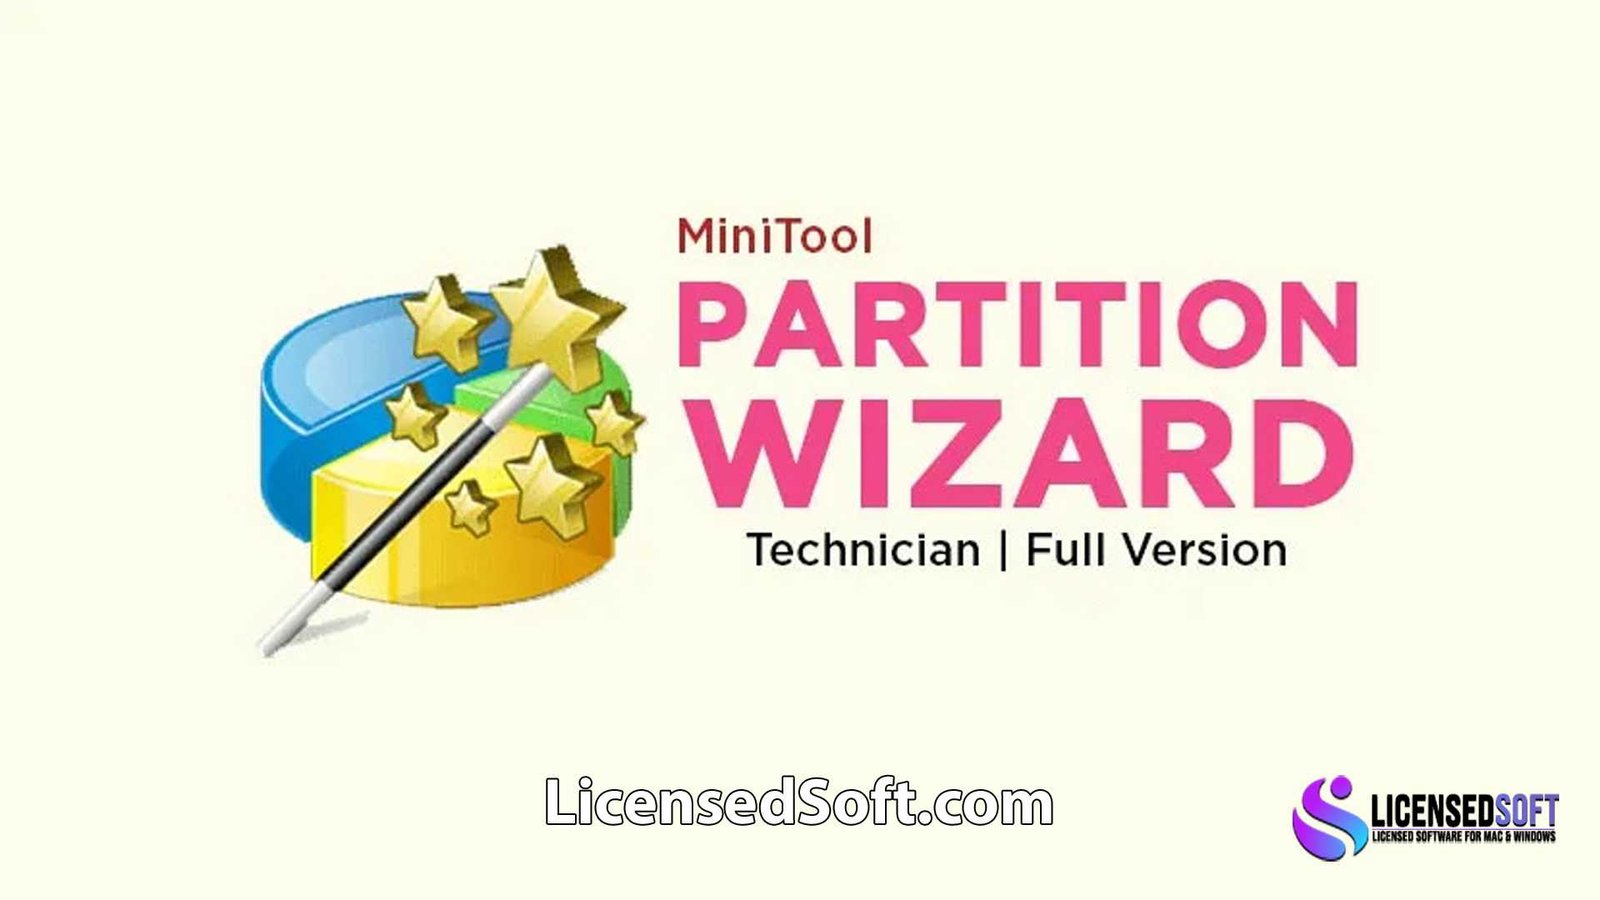 MiniTool Partition Wizard 12.8 Pro Ultimate Cover Image By LicensedSoft